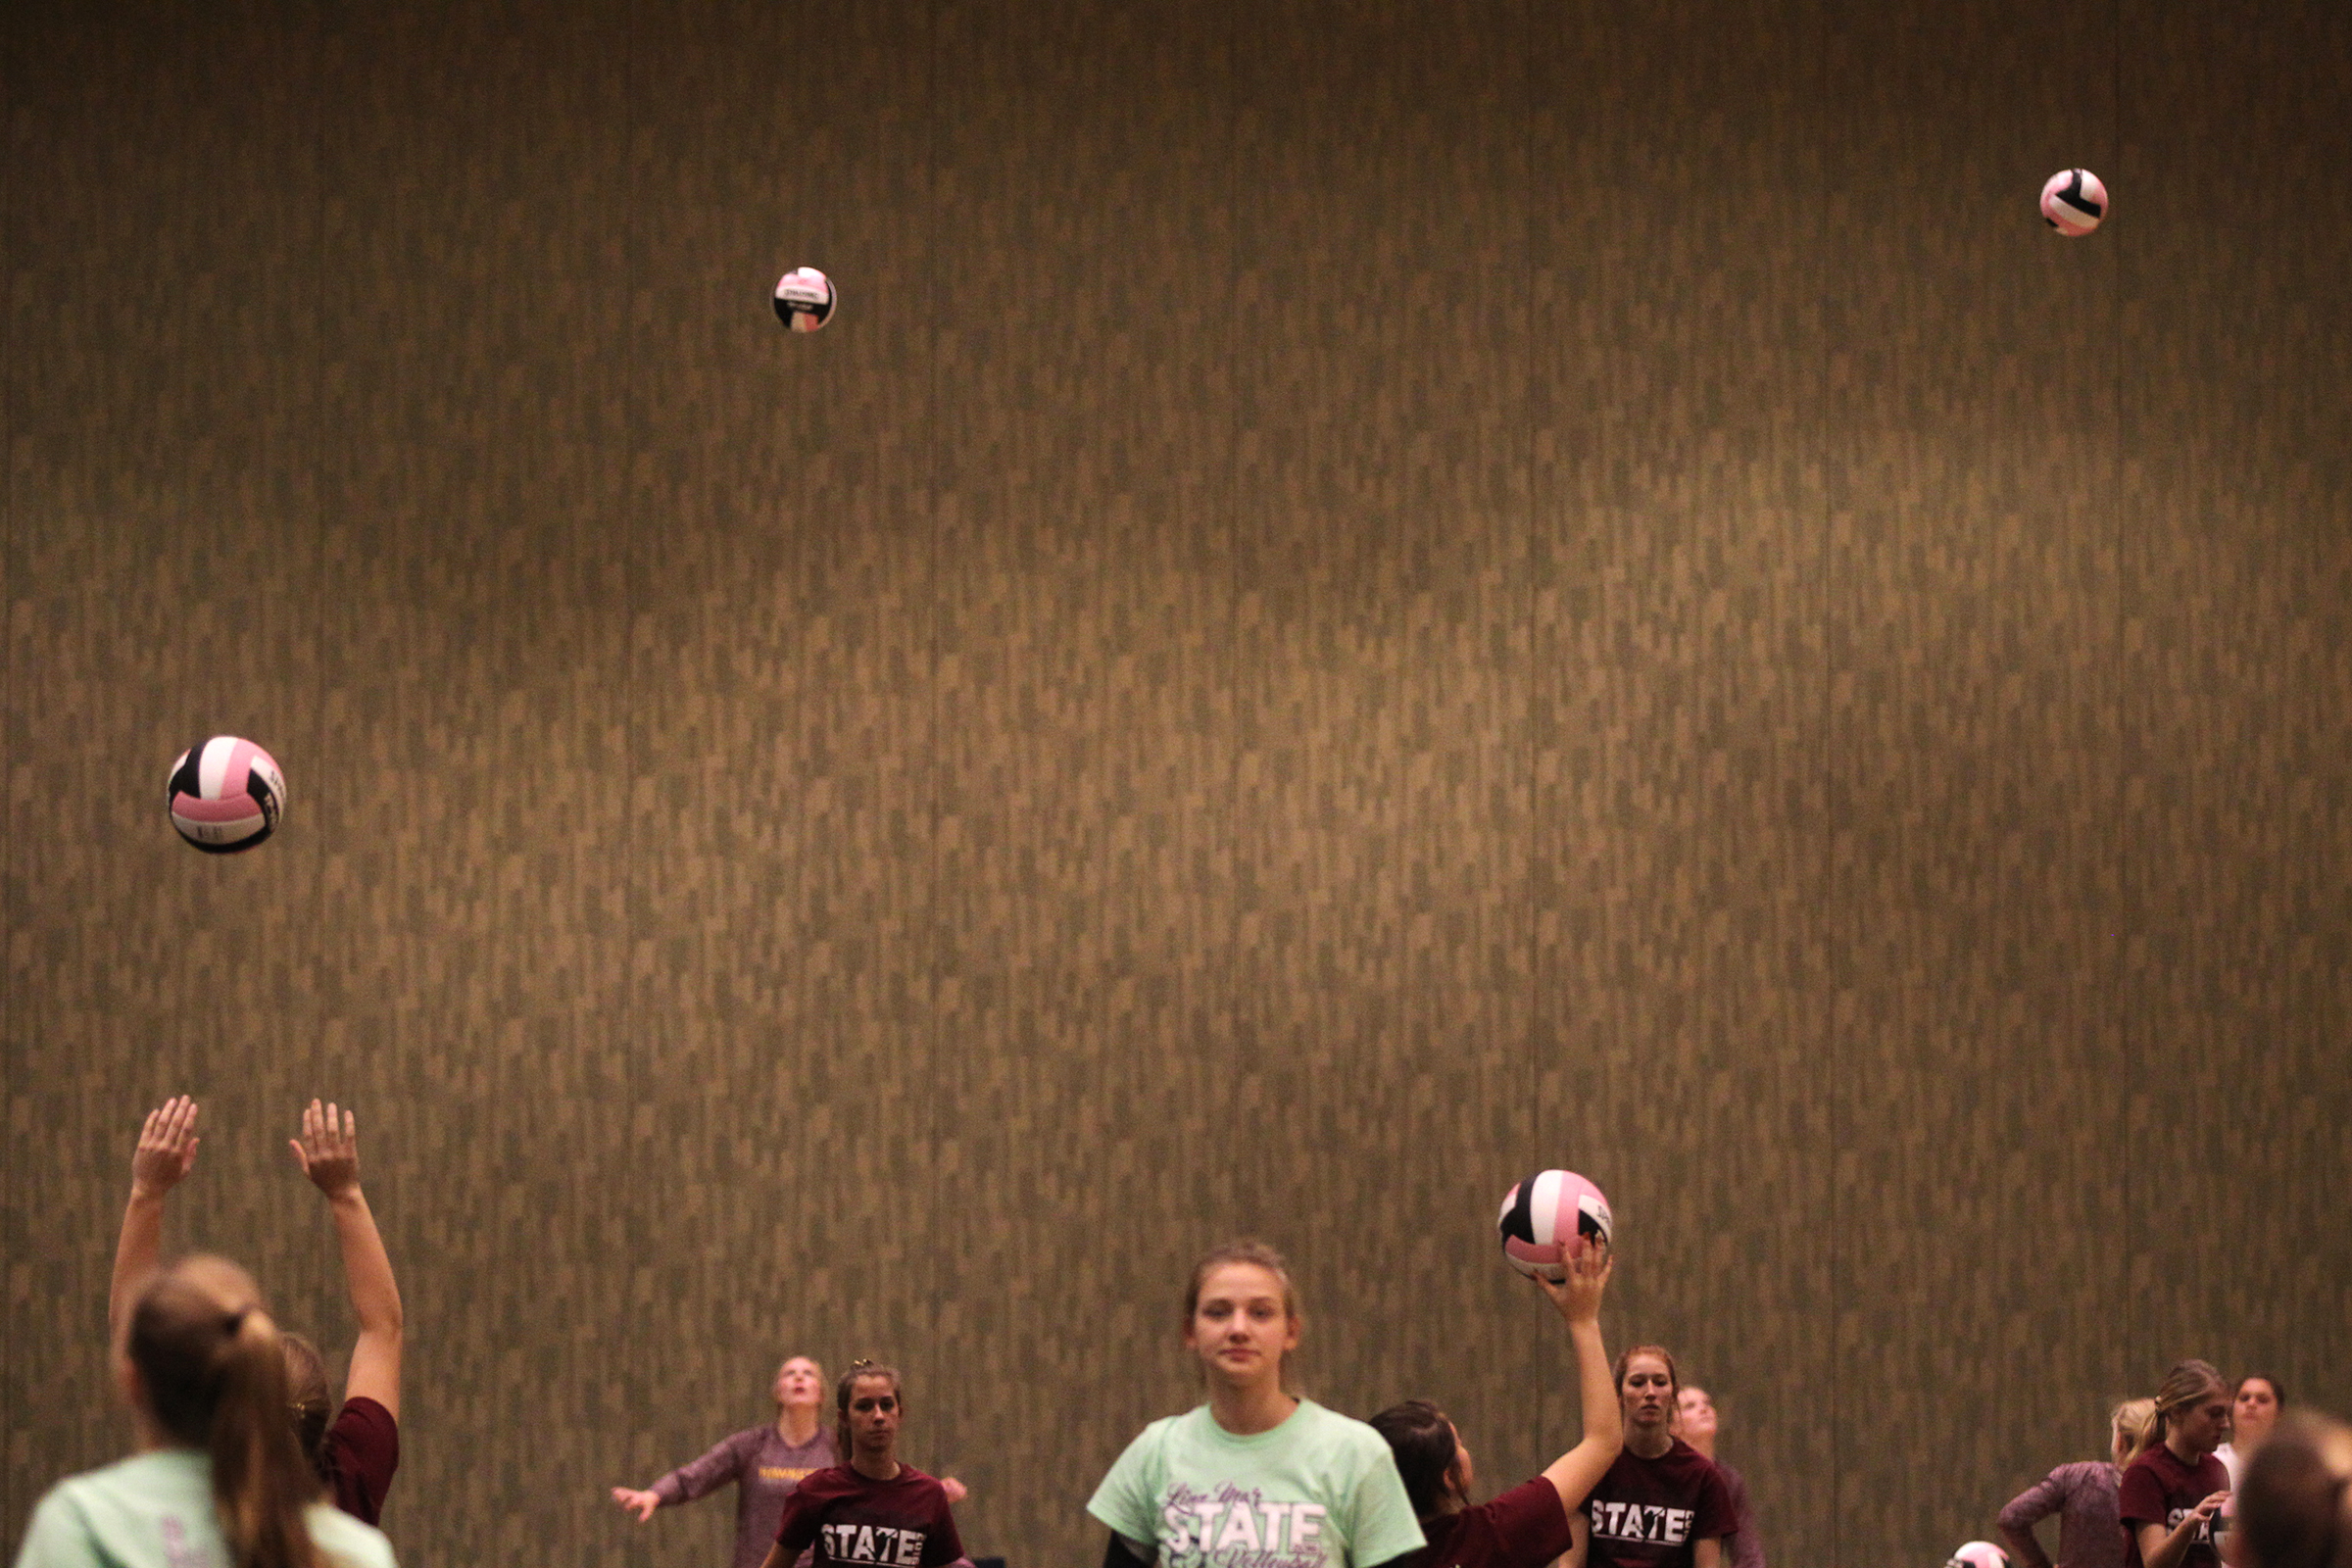  Players warm up for their matches at the Iowa State Volleyball Tournament in Cedar Rapids. 